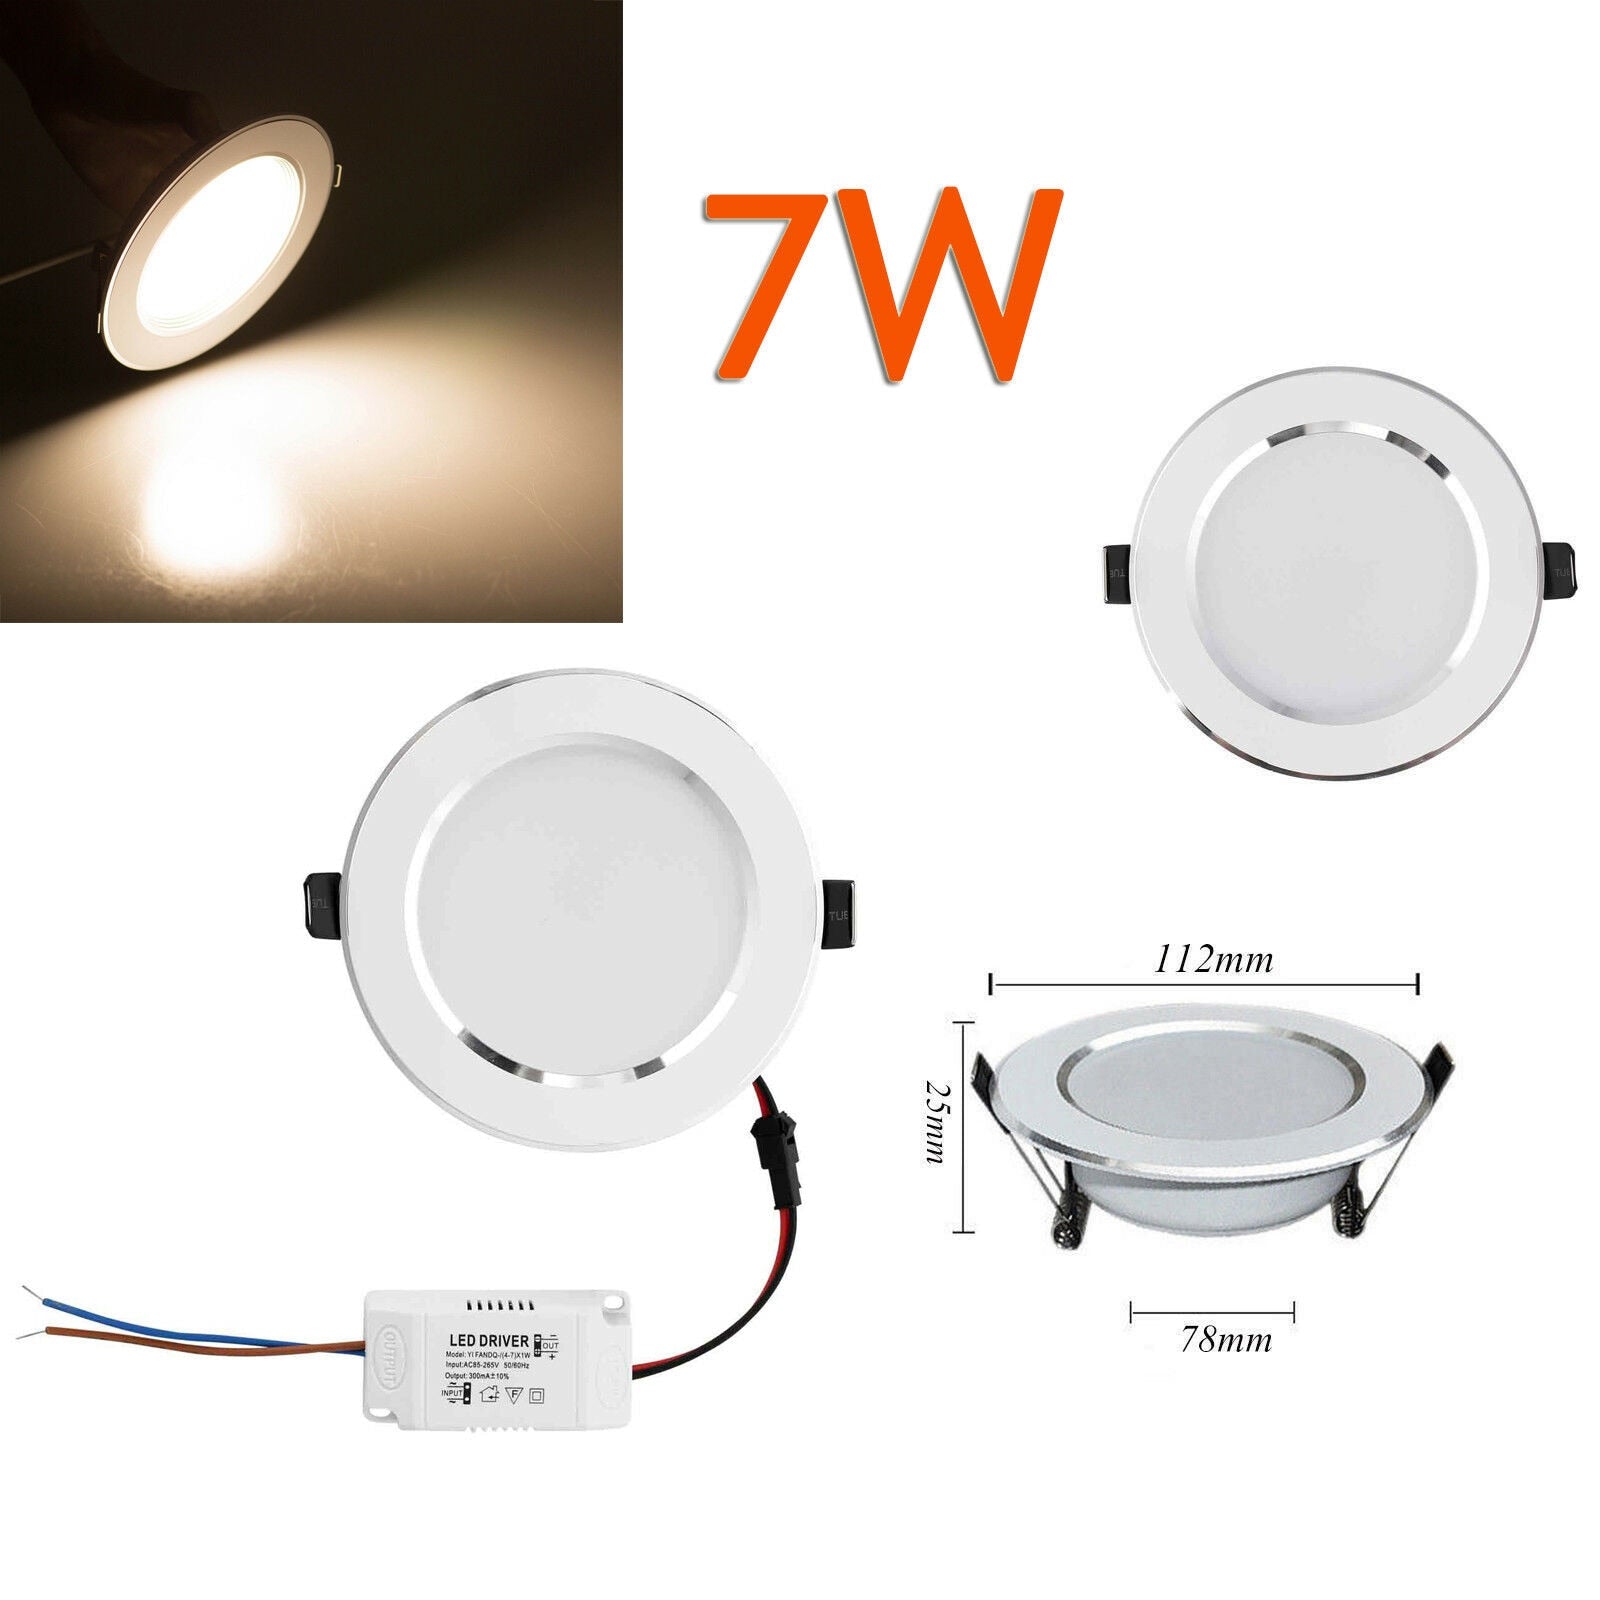 Dimmable LED Ceiling Down Light Recessed Panel Lamp Downlight Ultra-Bright Cool White Warm White AC 220V Spotlight Bulb